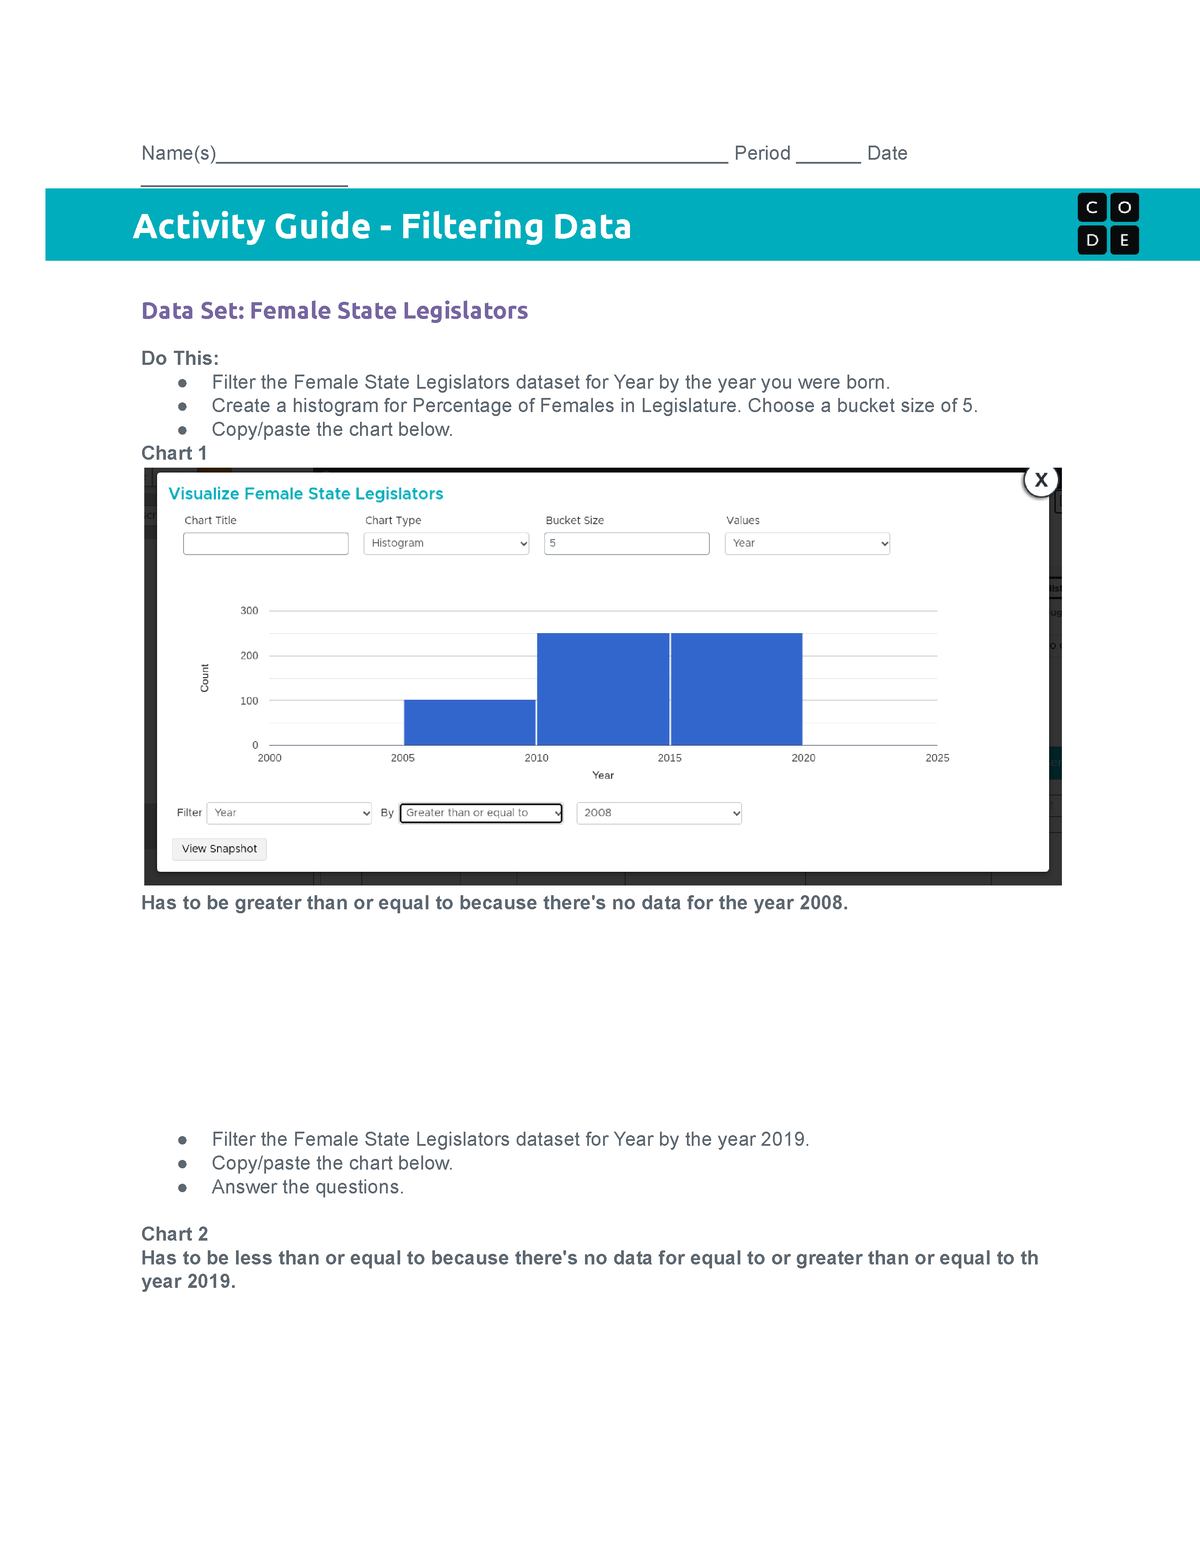 Lesson 3 Activity Guide Filtering Data Name(s